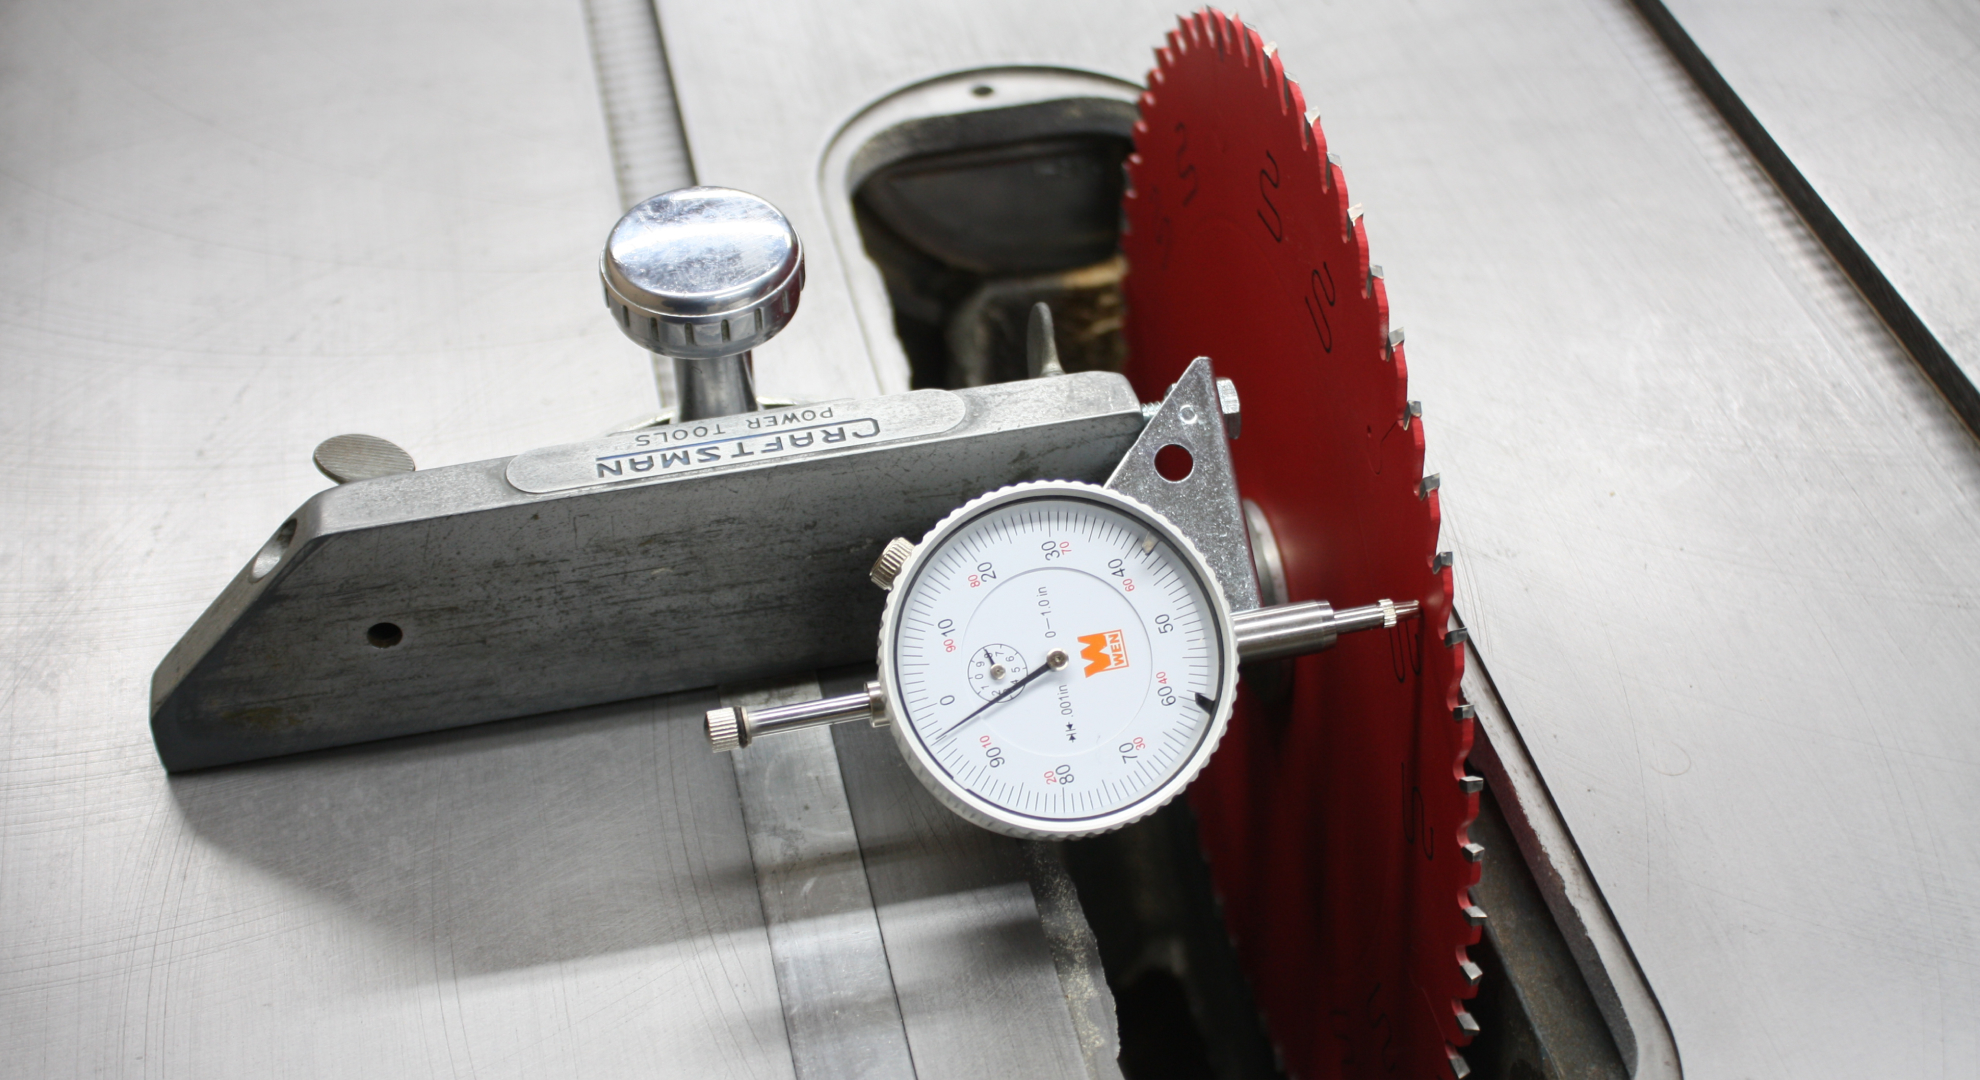 Having a properly aligned table saw blade is important. Why?